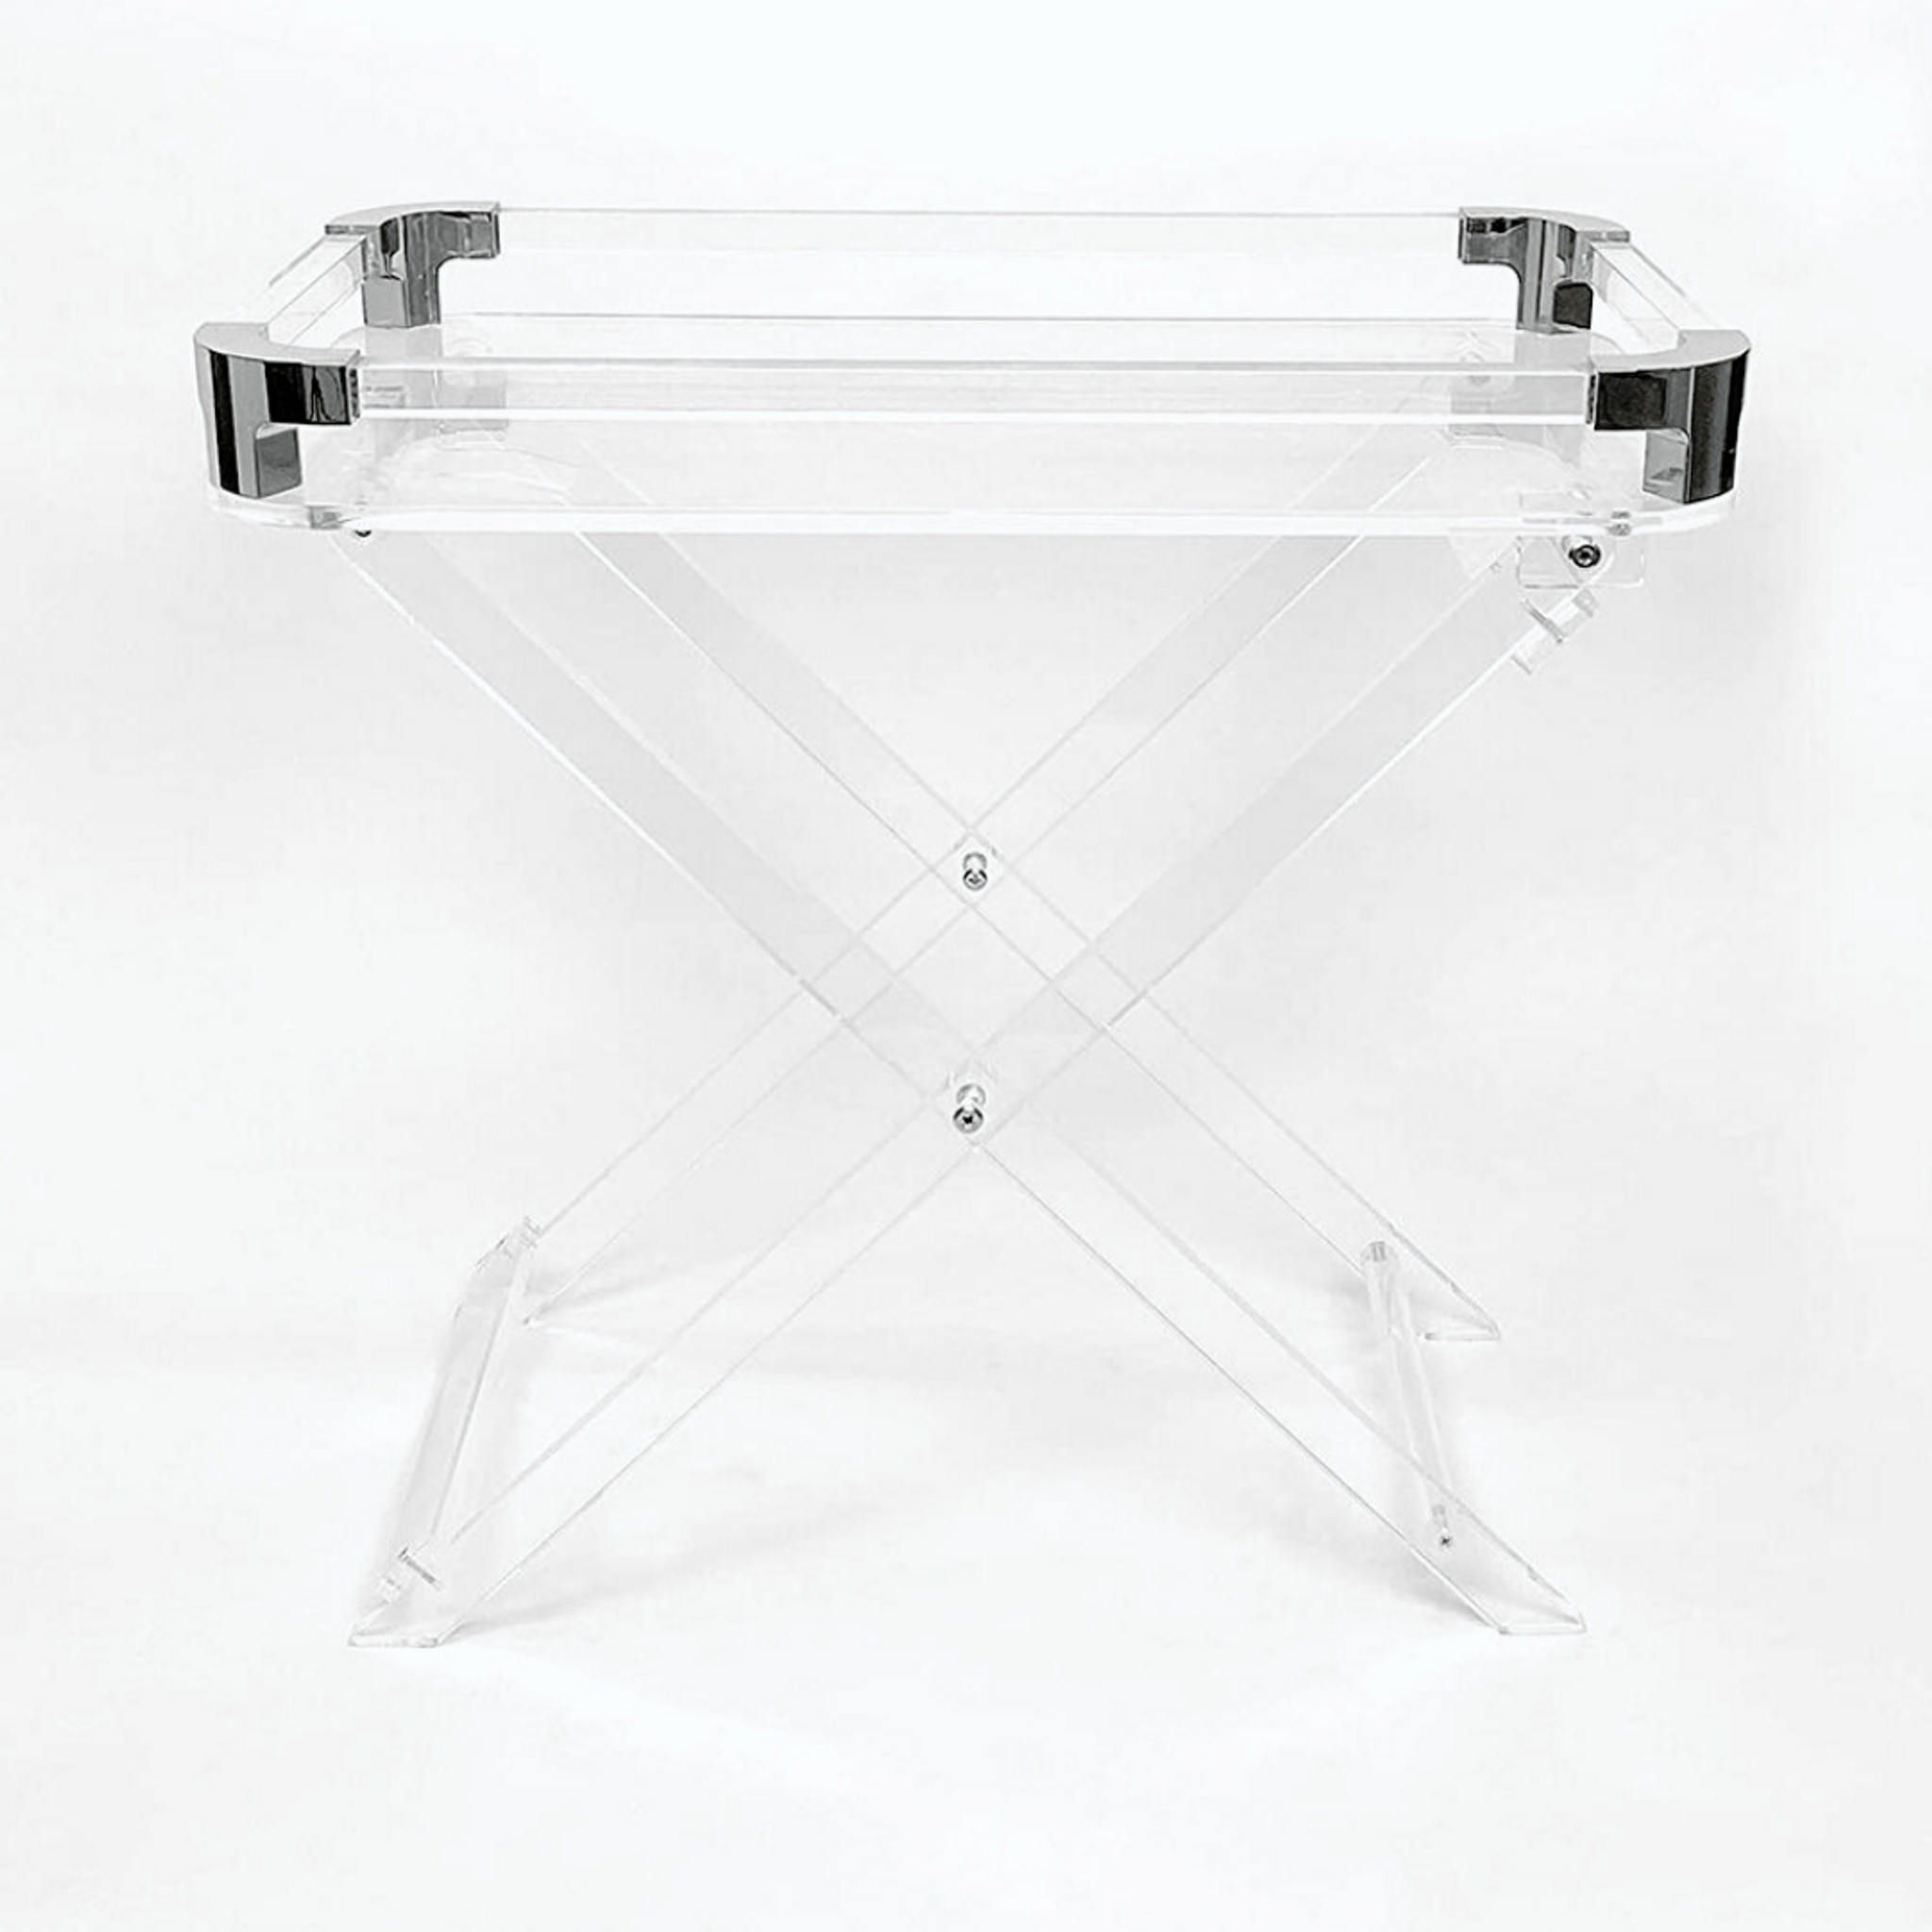 Designstyles Acrylic Folding Tray Table – Modern Chic Accent Desk - Kitchen and Bar Serving Table 